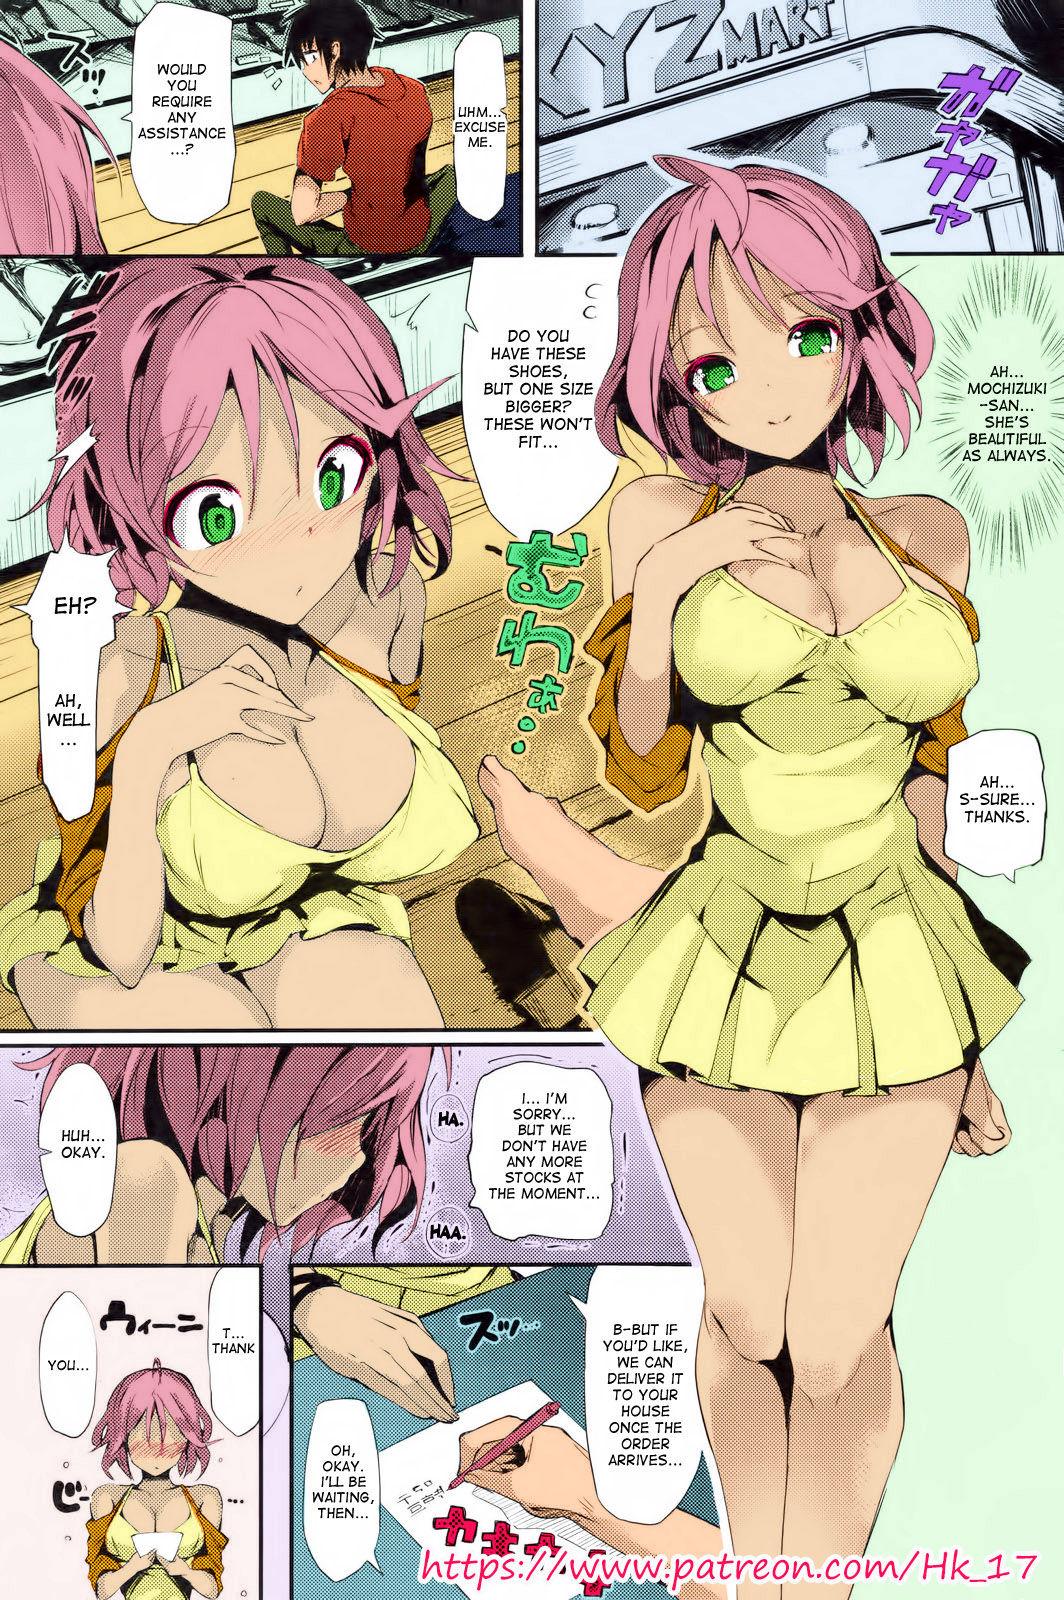 [Patreon] Hk_17 - Lovely Scent - Momi - Full Color [English] 12